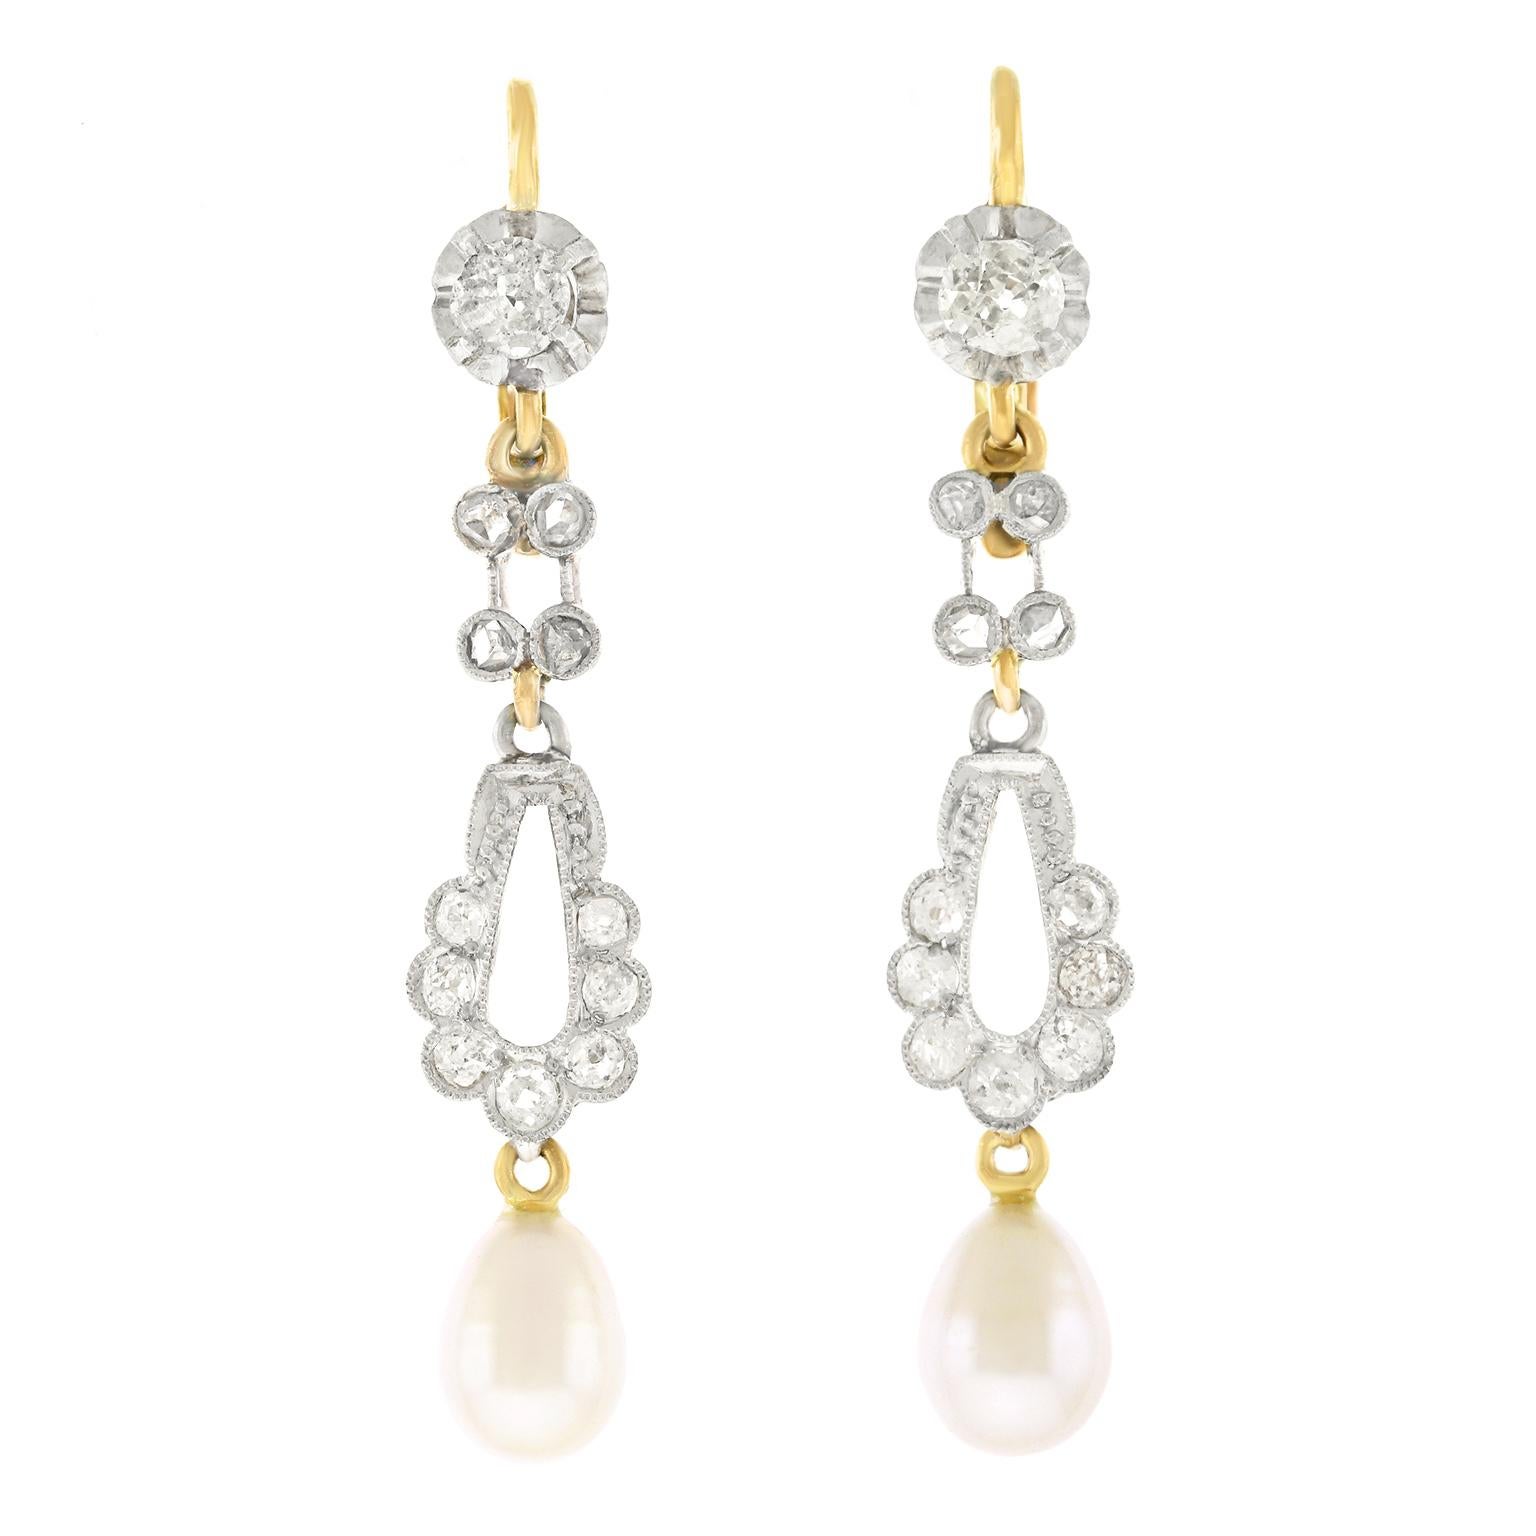 Antique Diamond and Pearl Chandelier Earrings